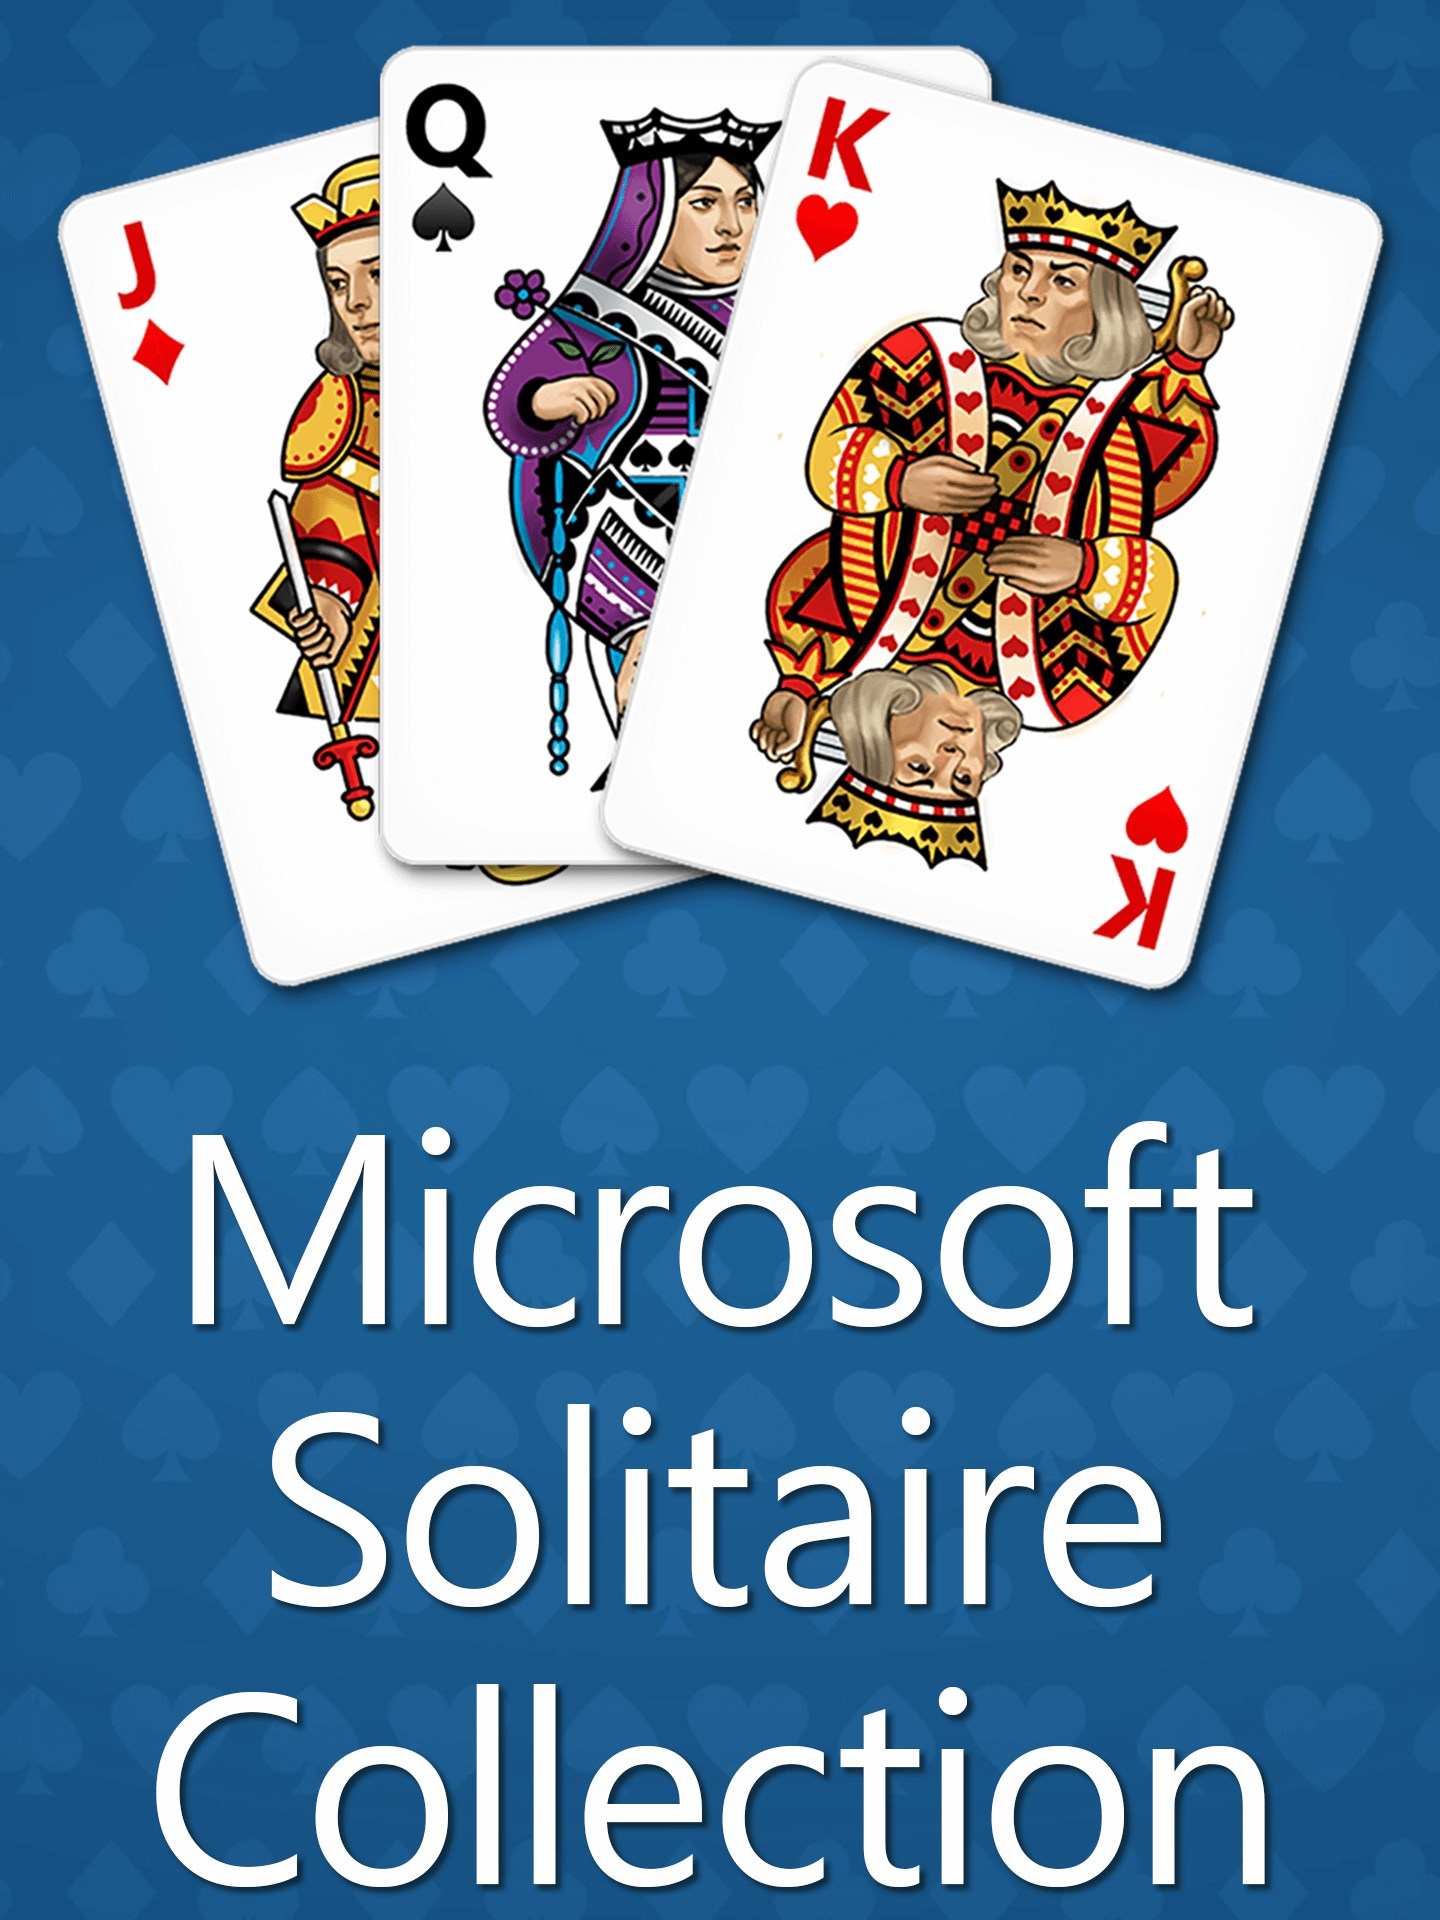 Windows solitaire collection. Игры Microsoft Solitaire collection. Microsoft Солитер коллекция. Солитер коллекшн. Пасьянс Microsoft Solitaire collection.